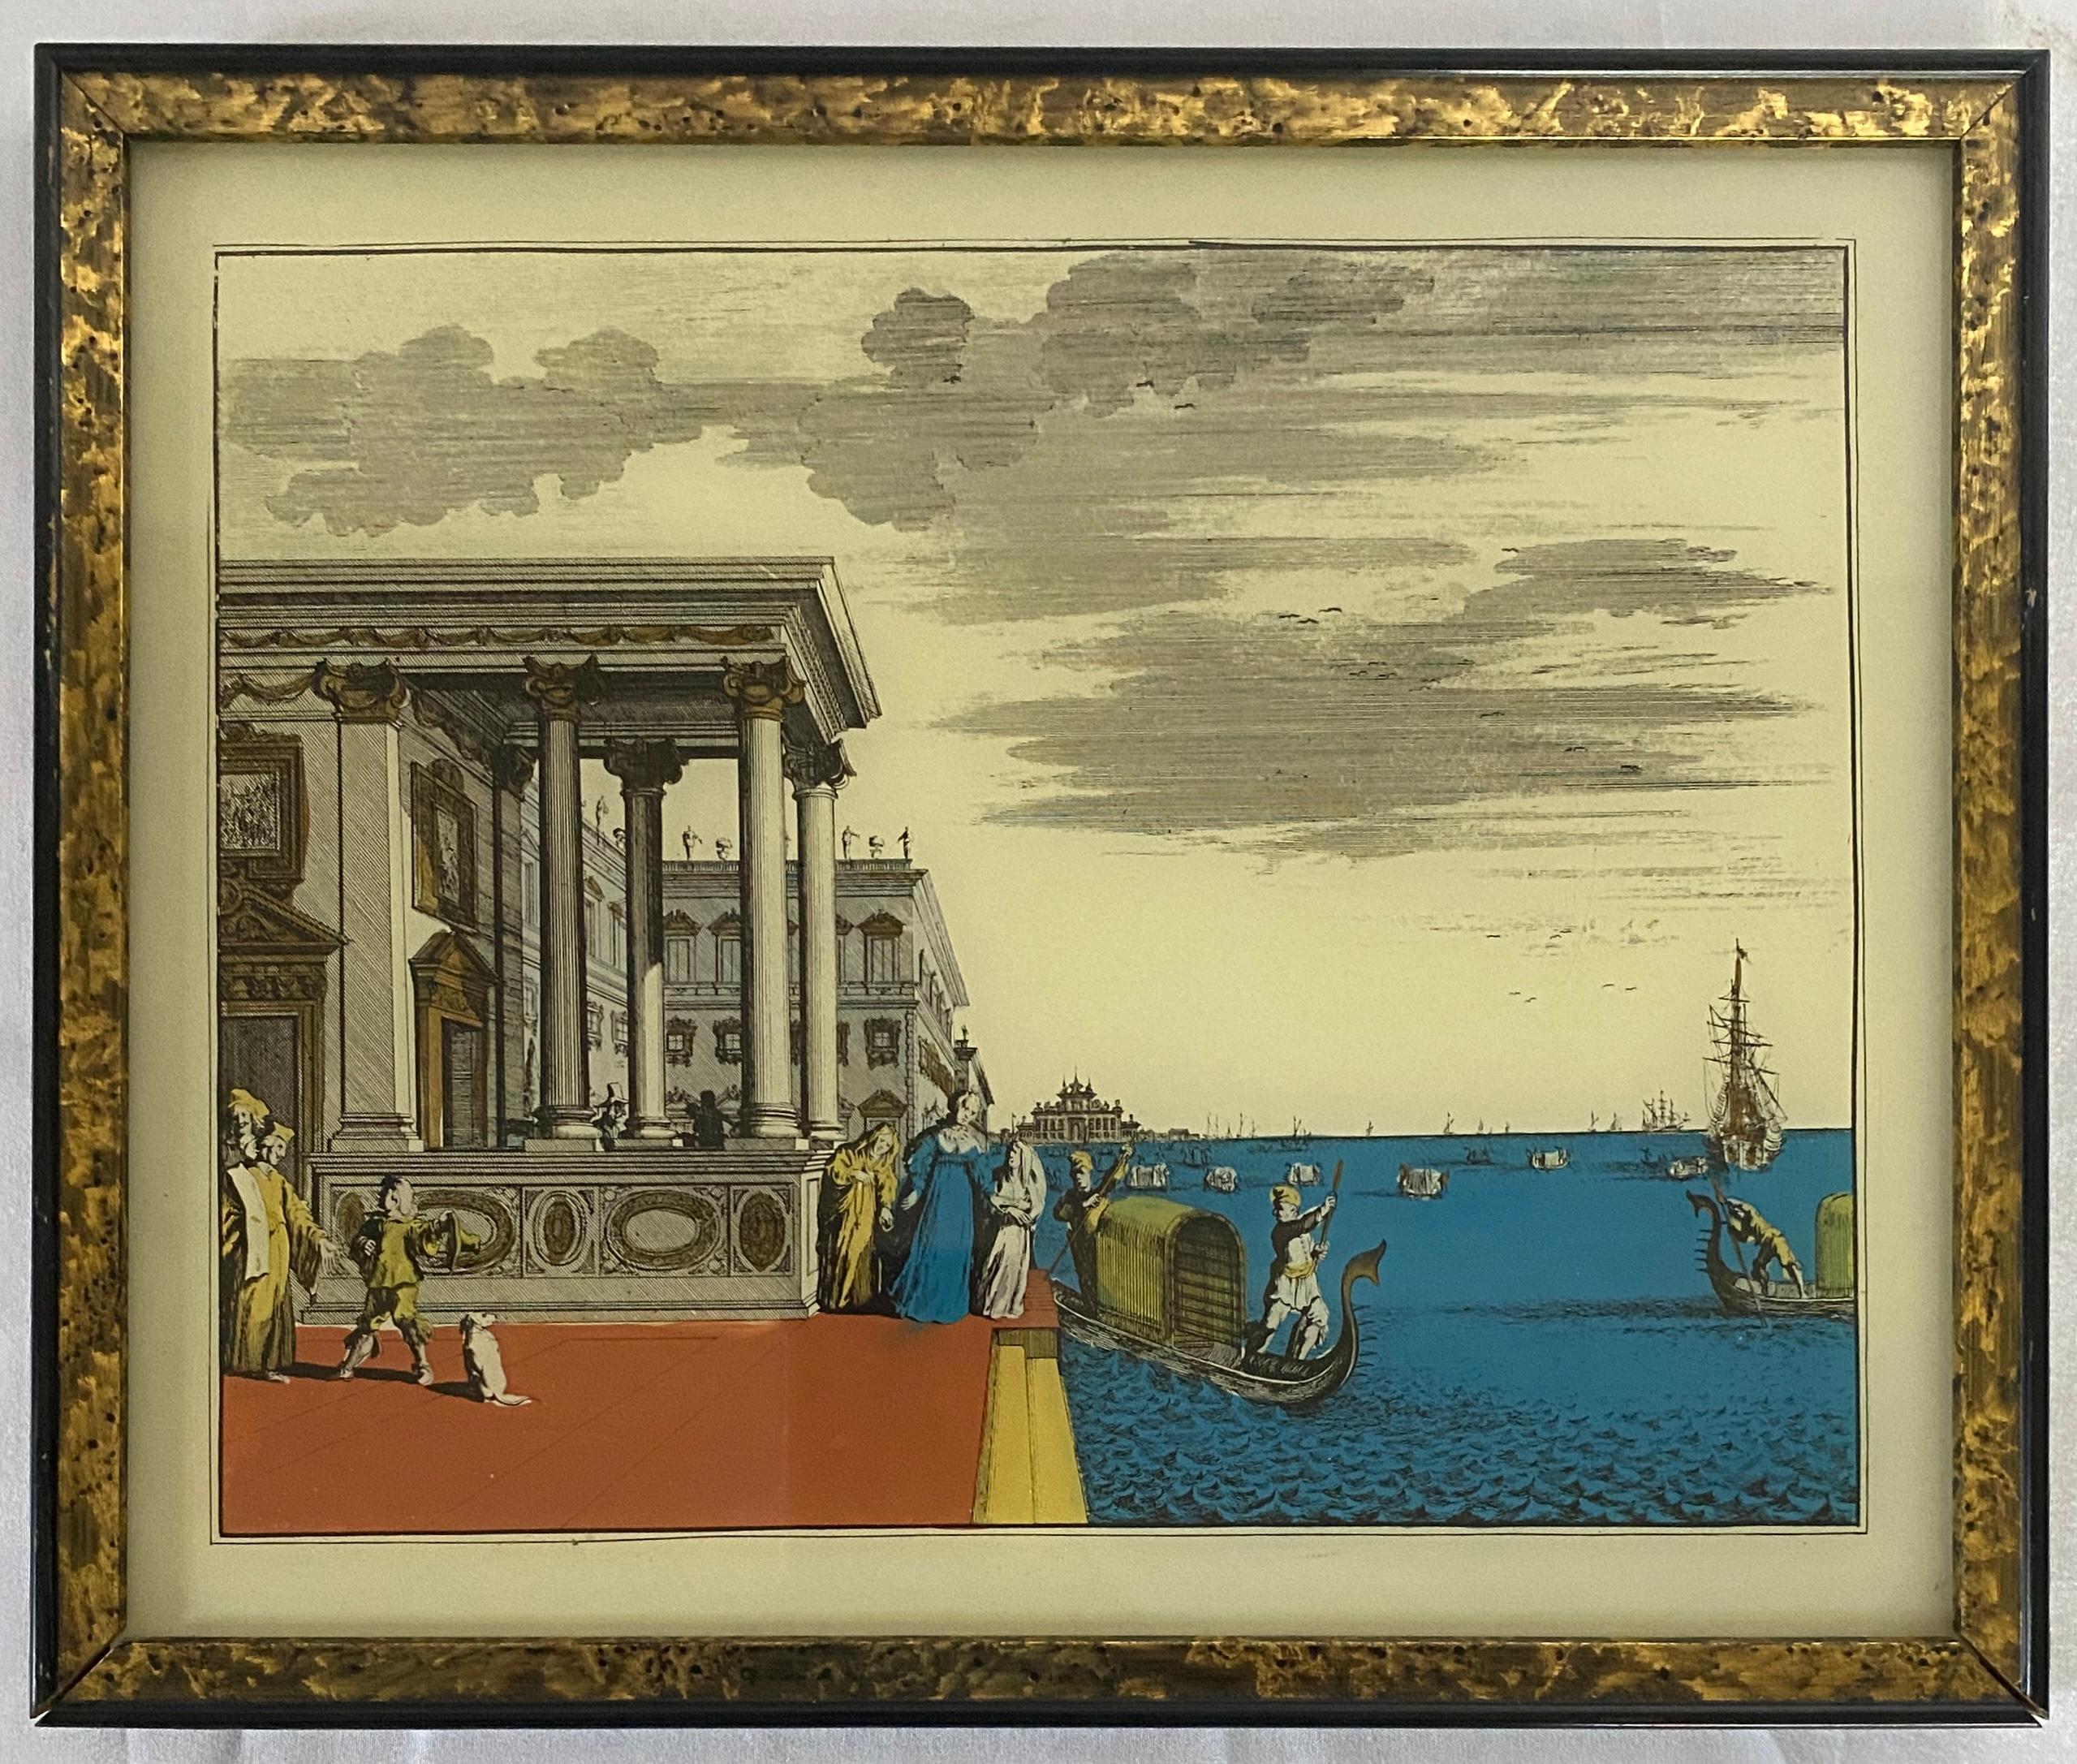 Three Italian Hand Colored Engraving Prints with Metallic Embellishments For Sale 1